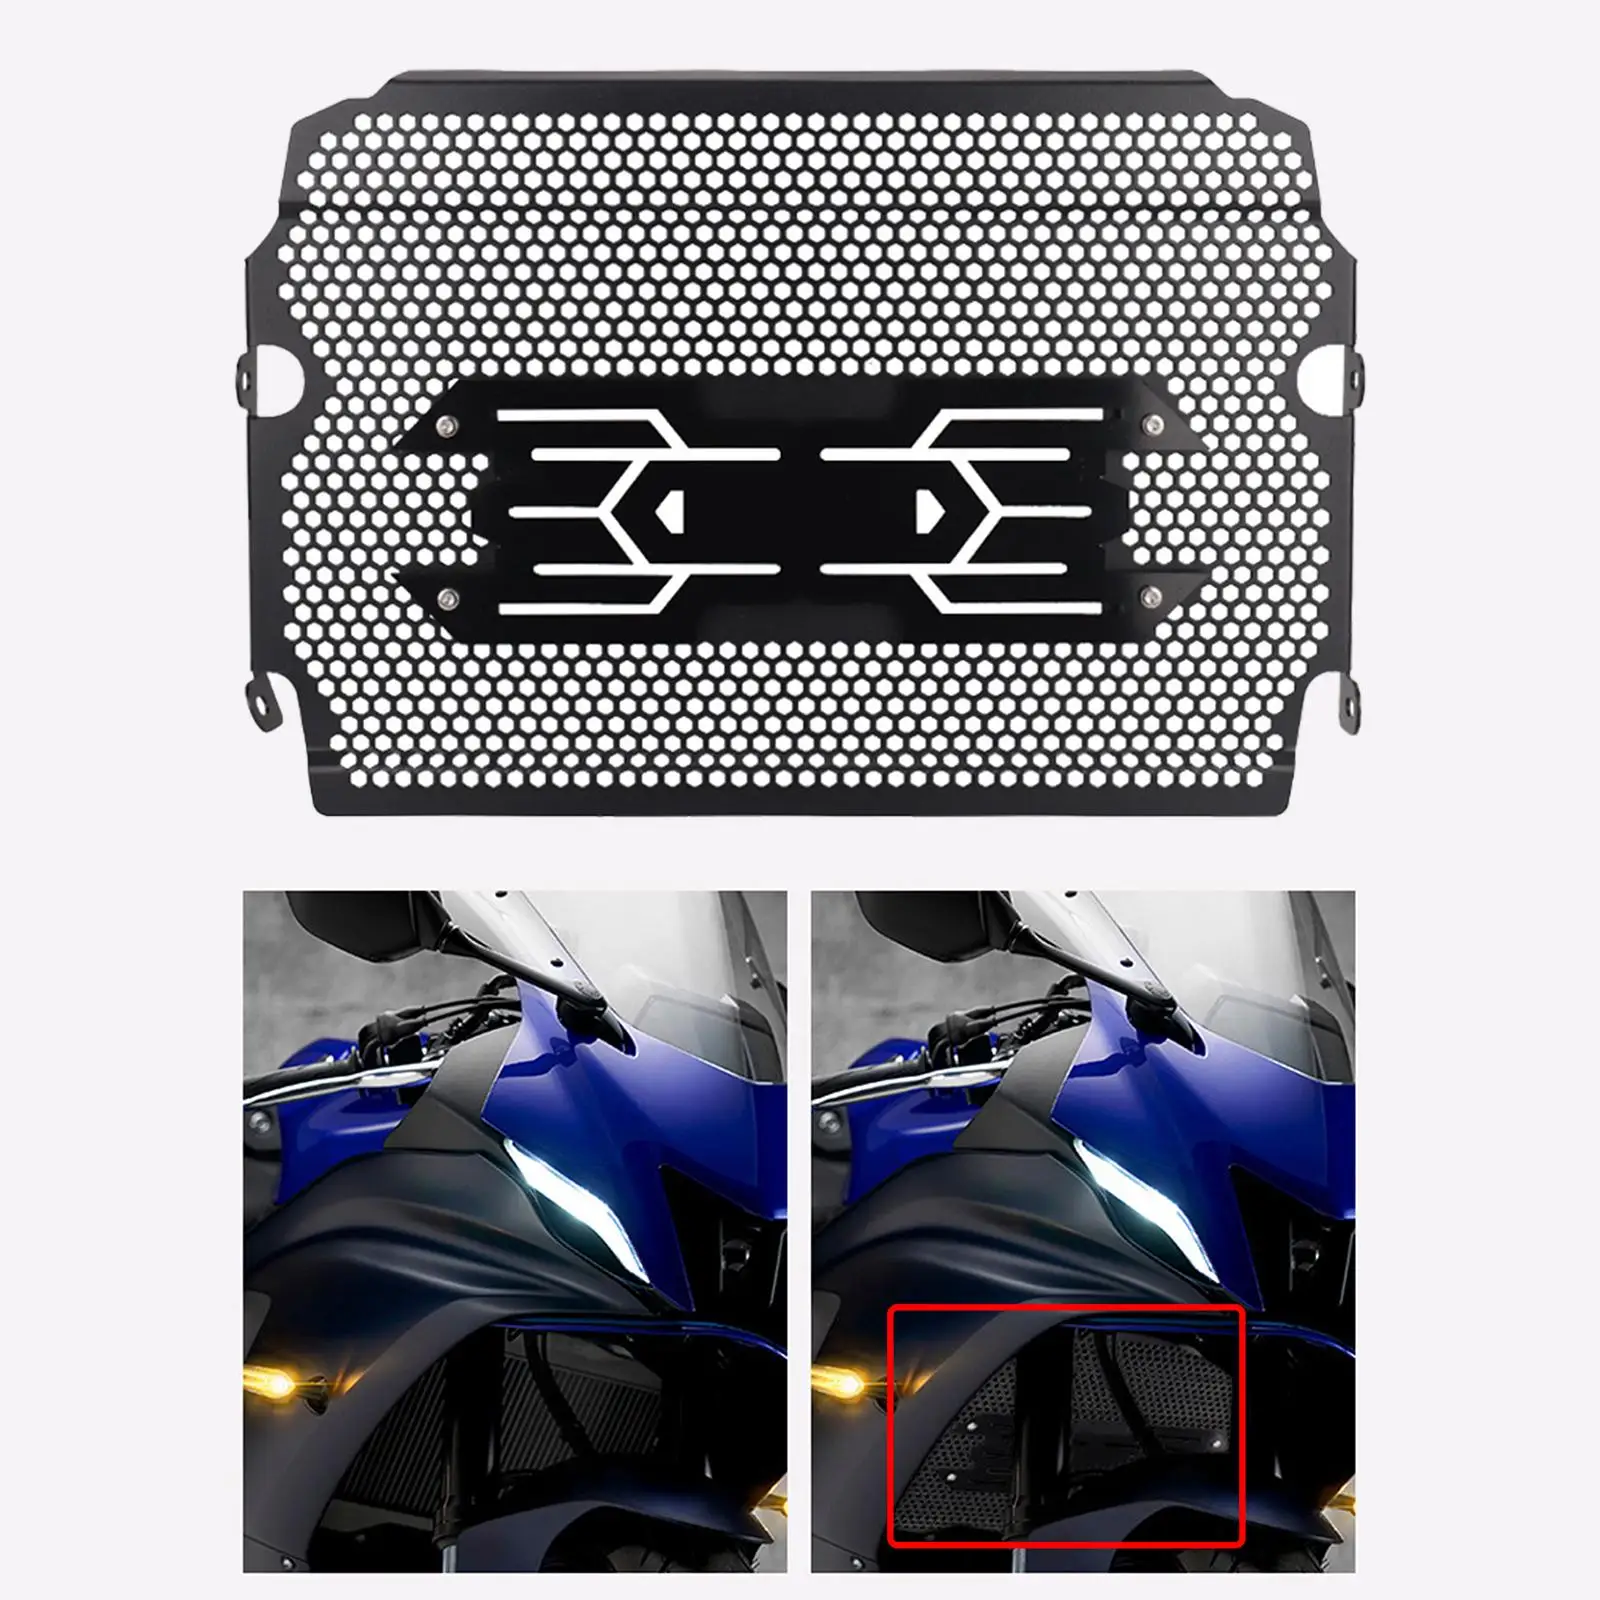 Motorcycle Radiator Grille Guard Aluminum Alloy Black for Yamaha Yzf R7